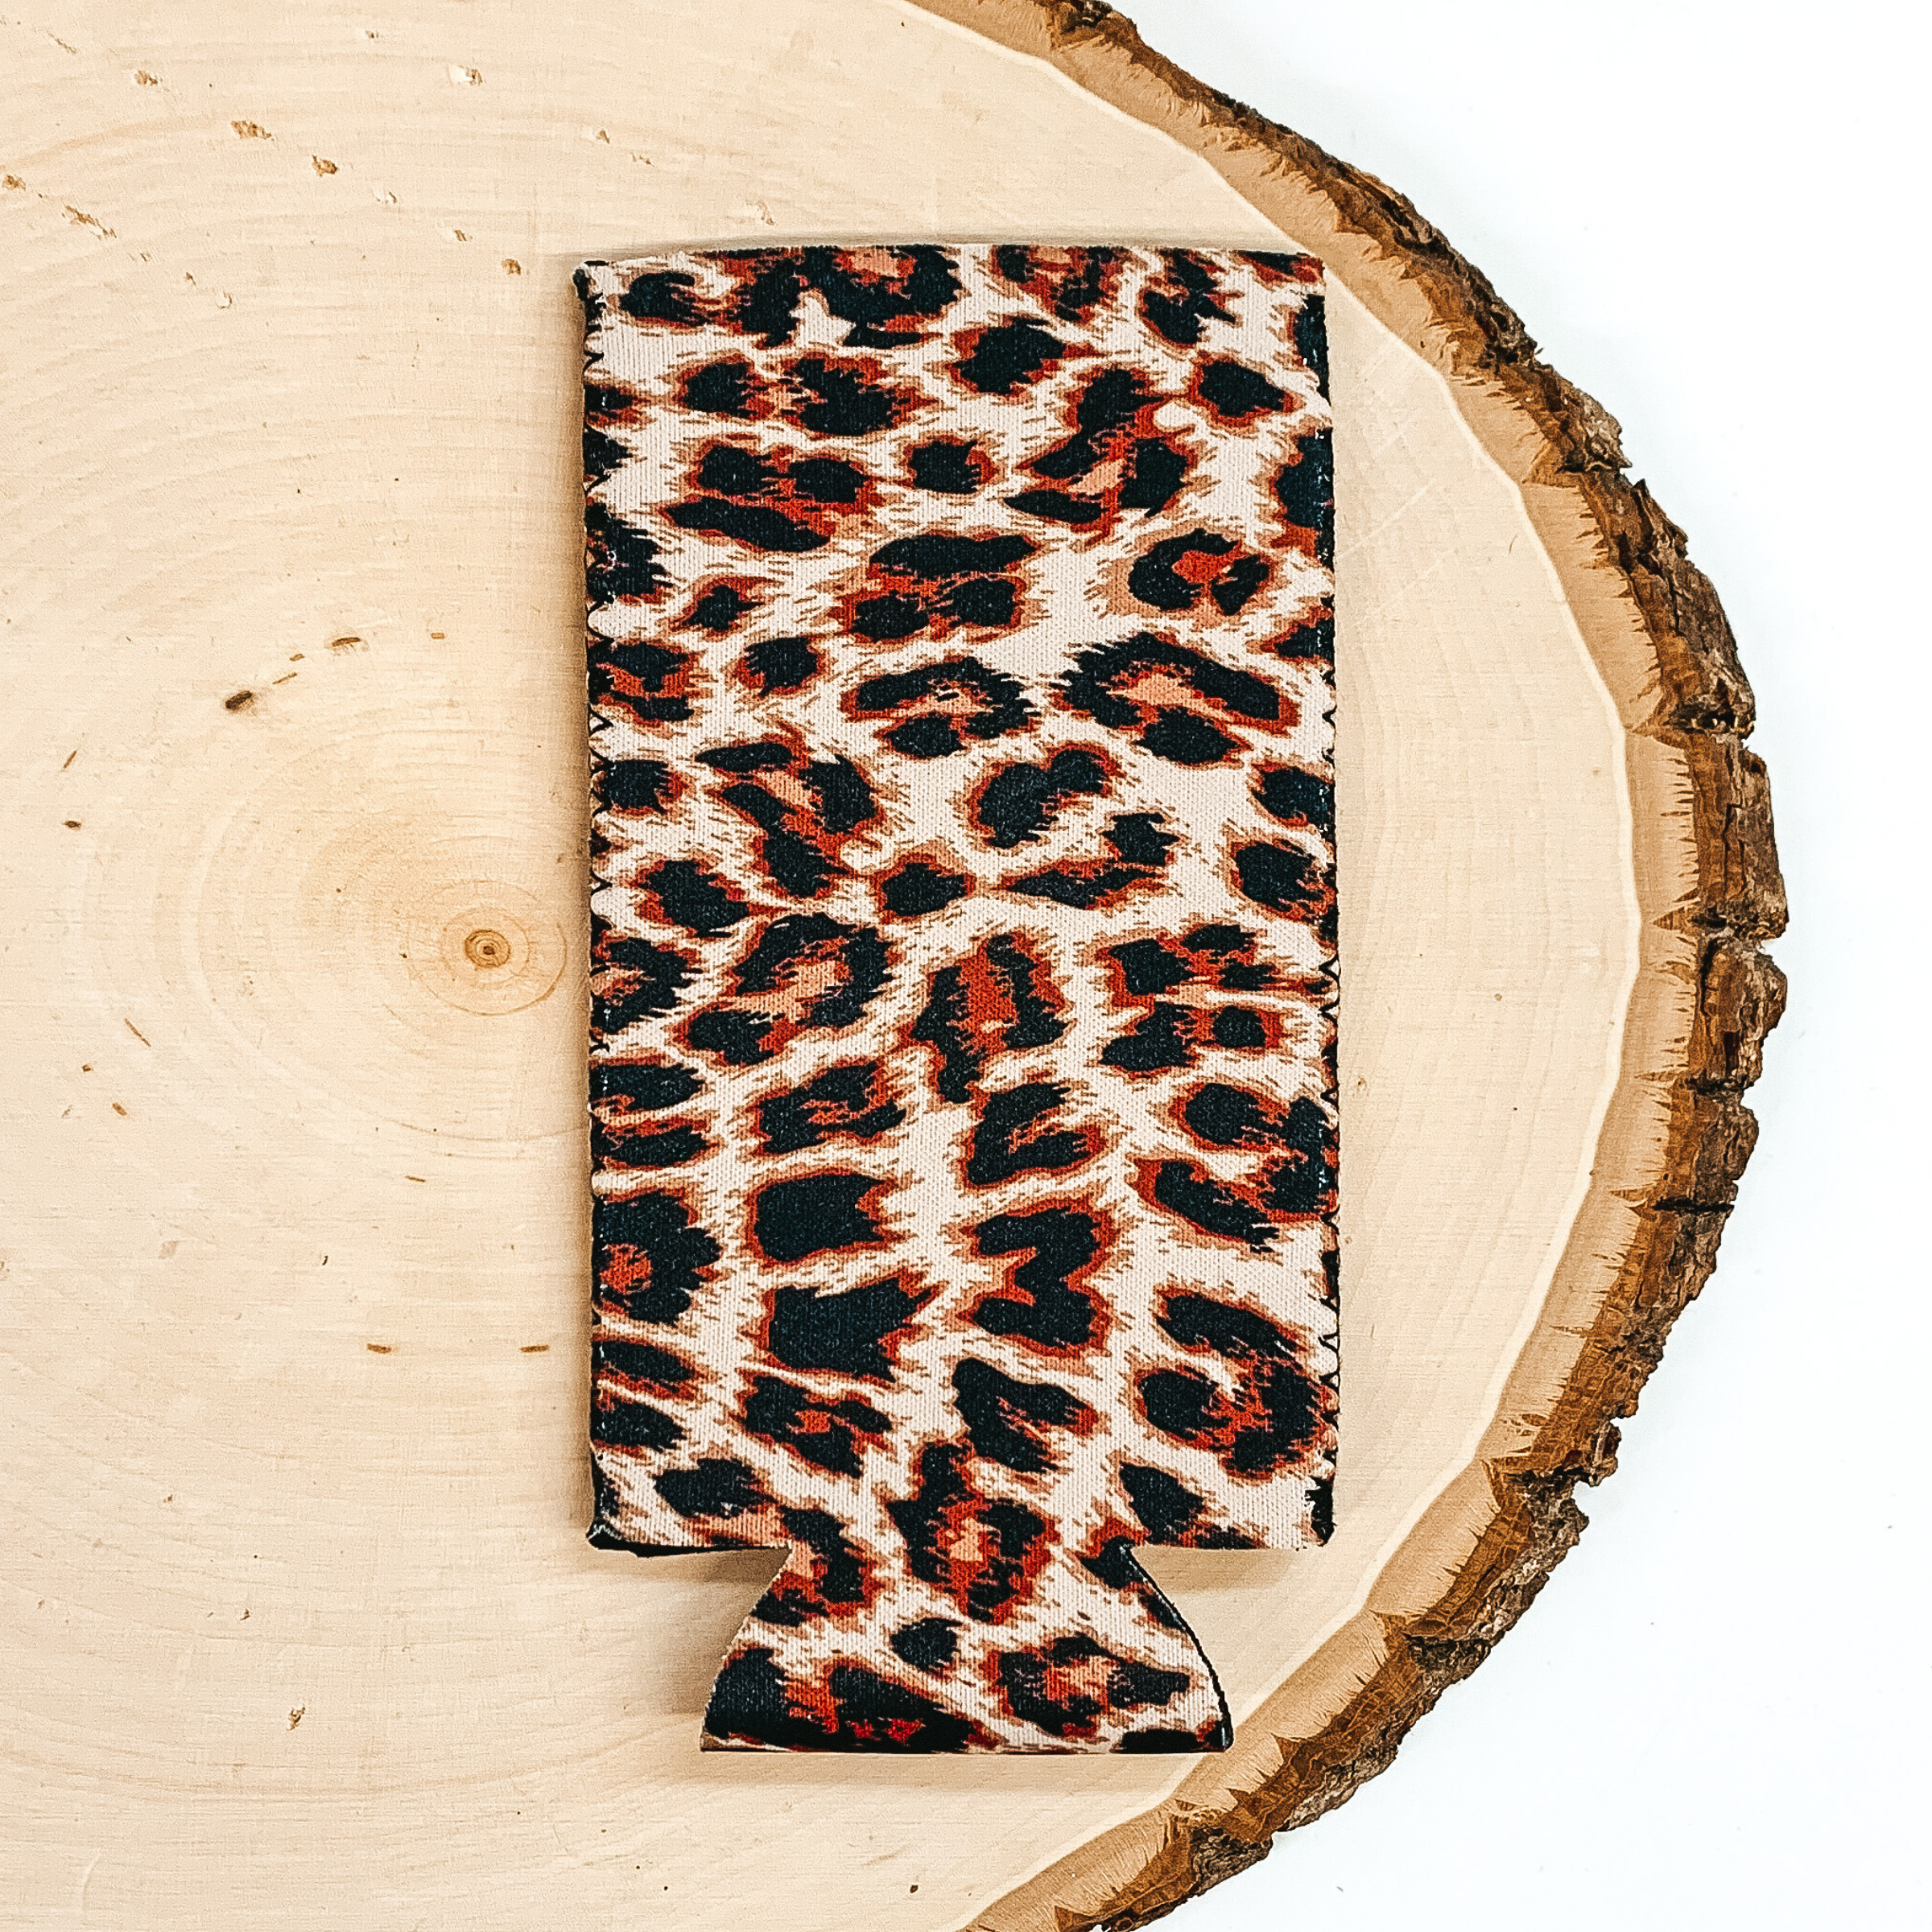 Leopard print slim can koozie pictured laying on a piece of wood on a white background.